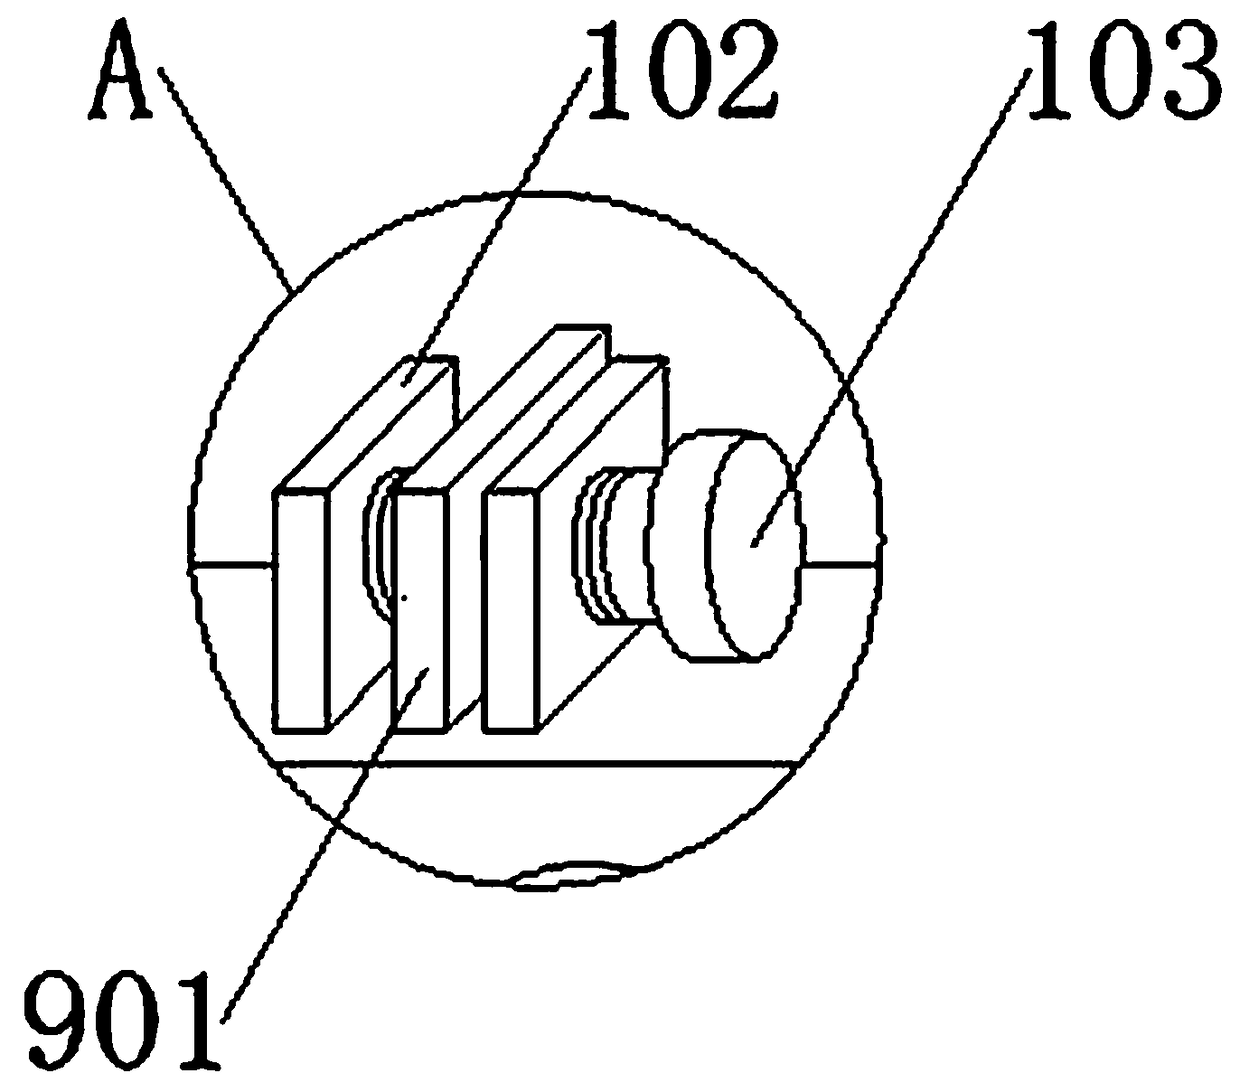 Architectural-assembling transmission device